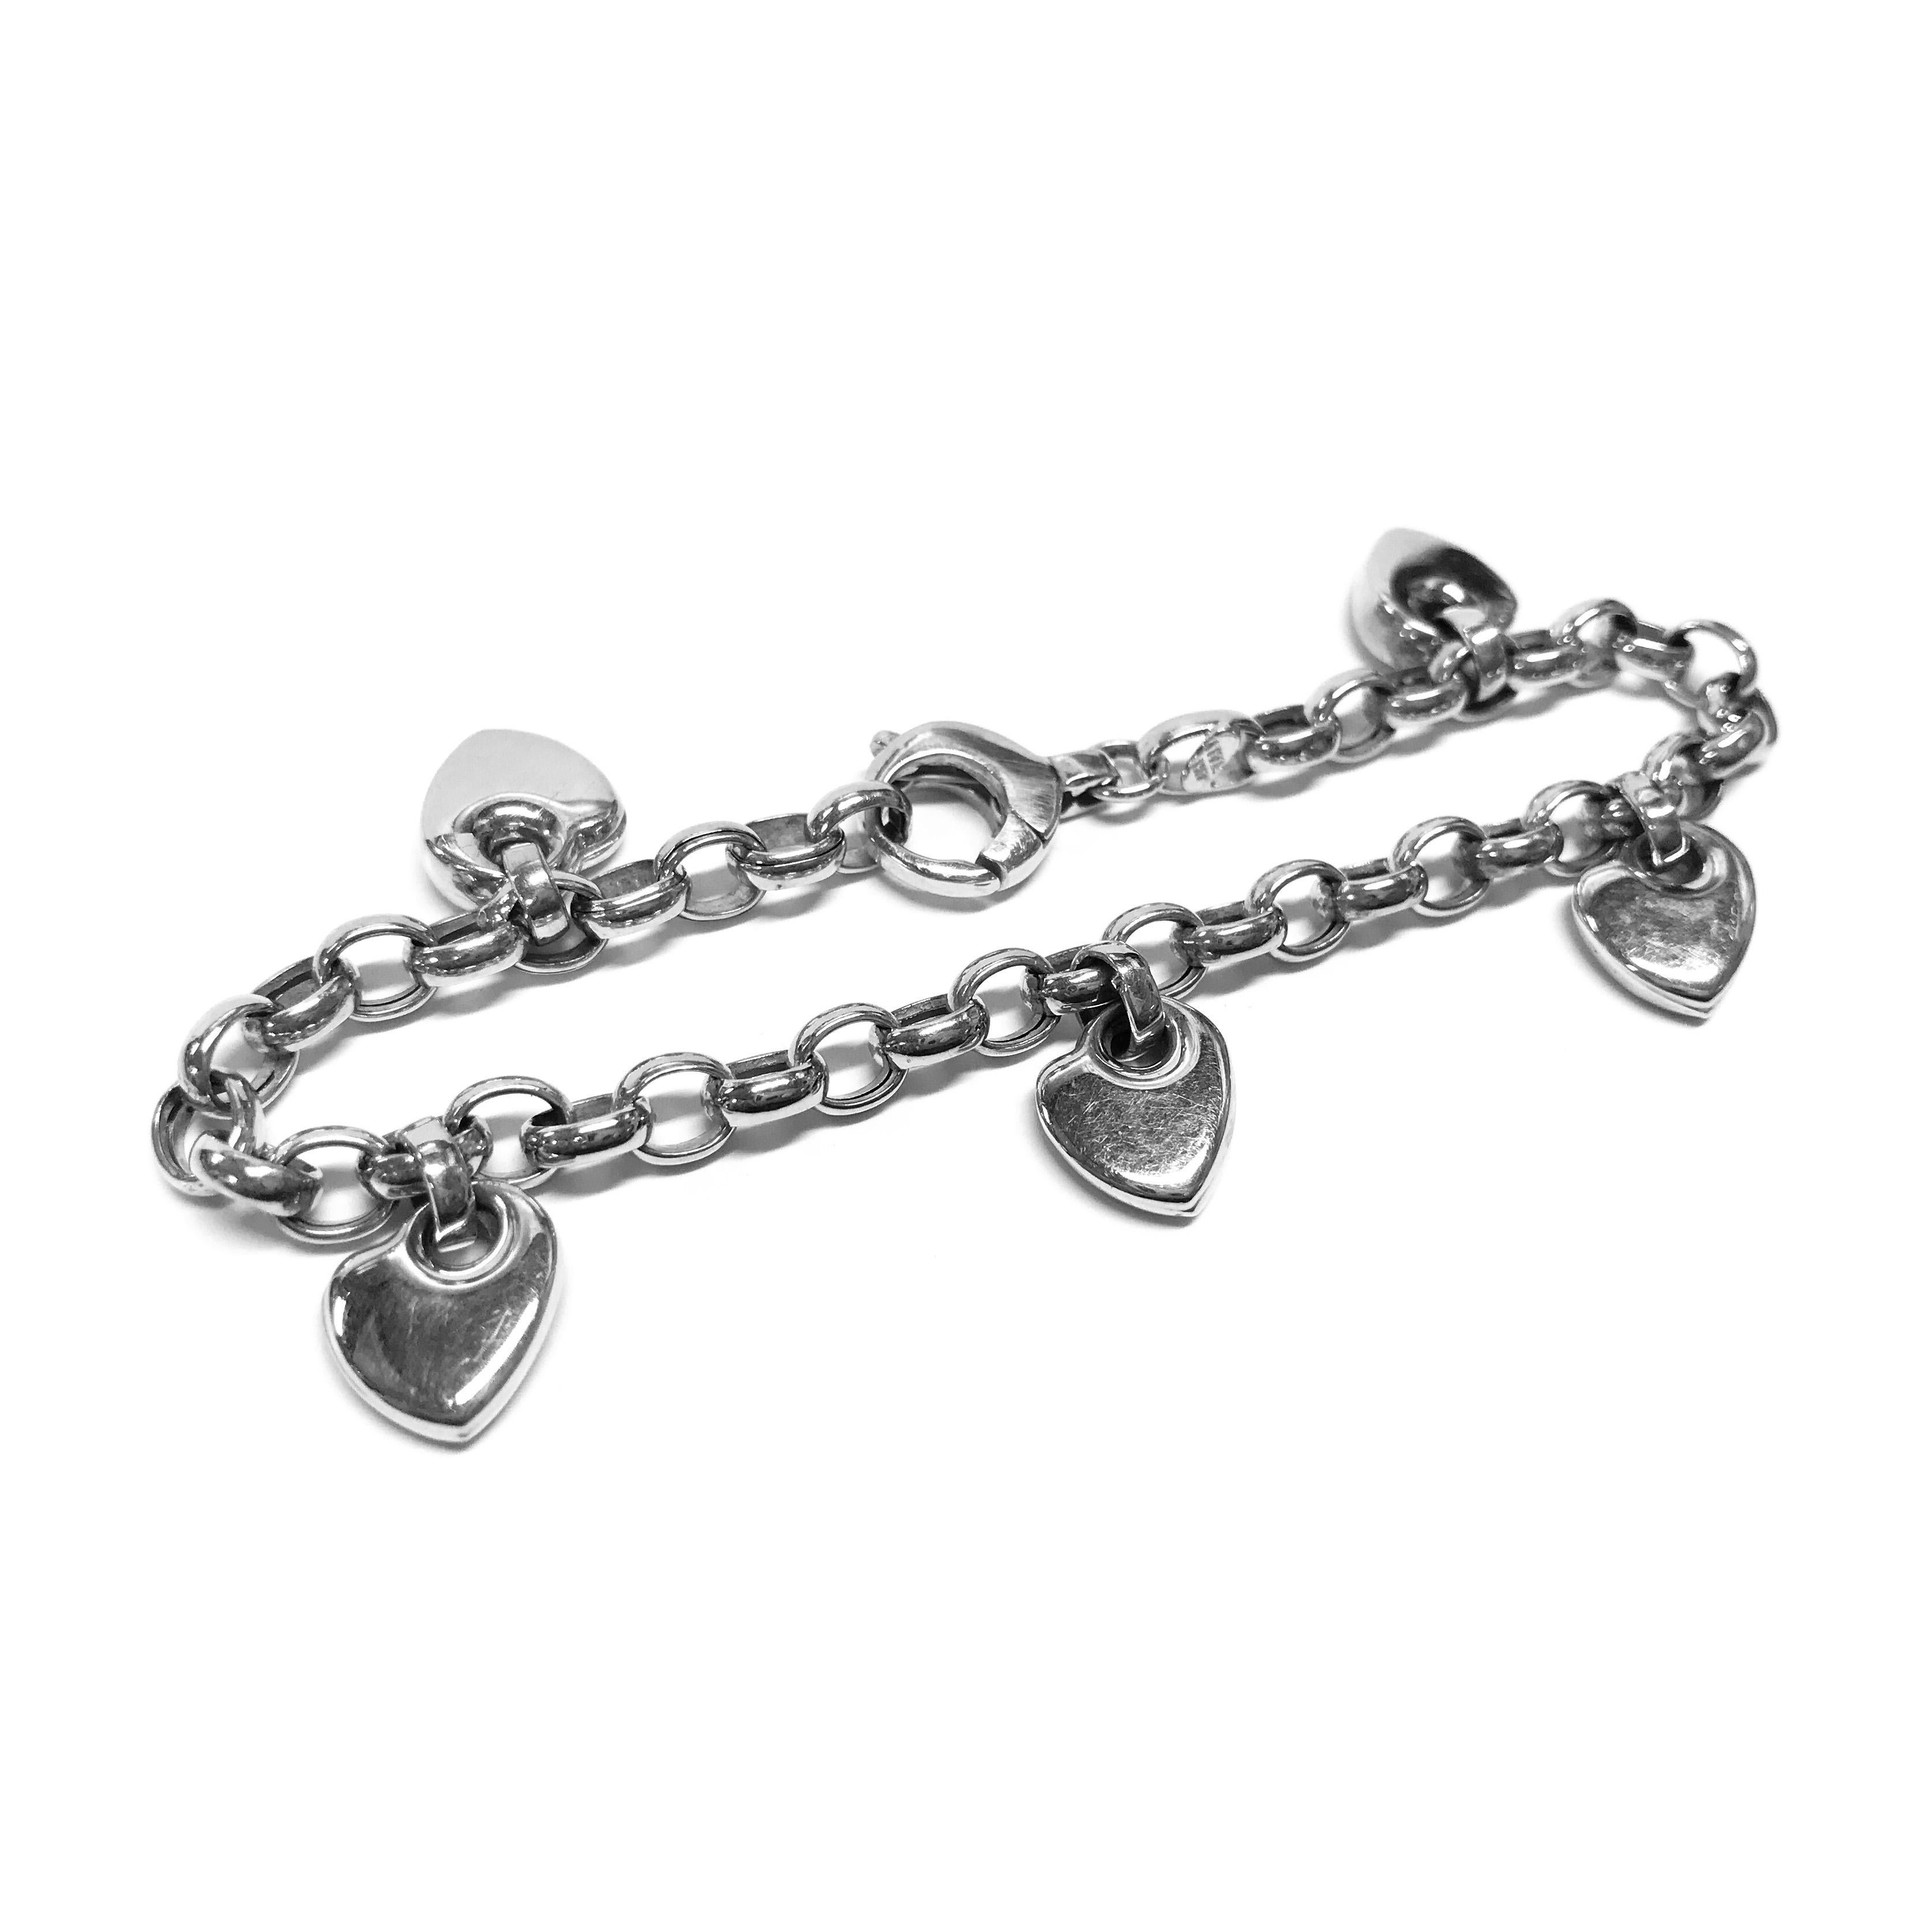 14 Karat White Gold Italian Heart Charm Bracelet. This bracelet features five heart-shaped charms that hang on the links of the rolo chain. The bracelet is 7